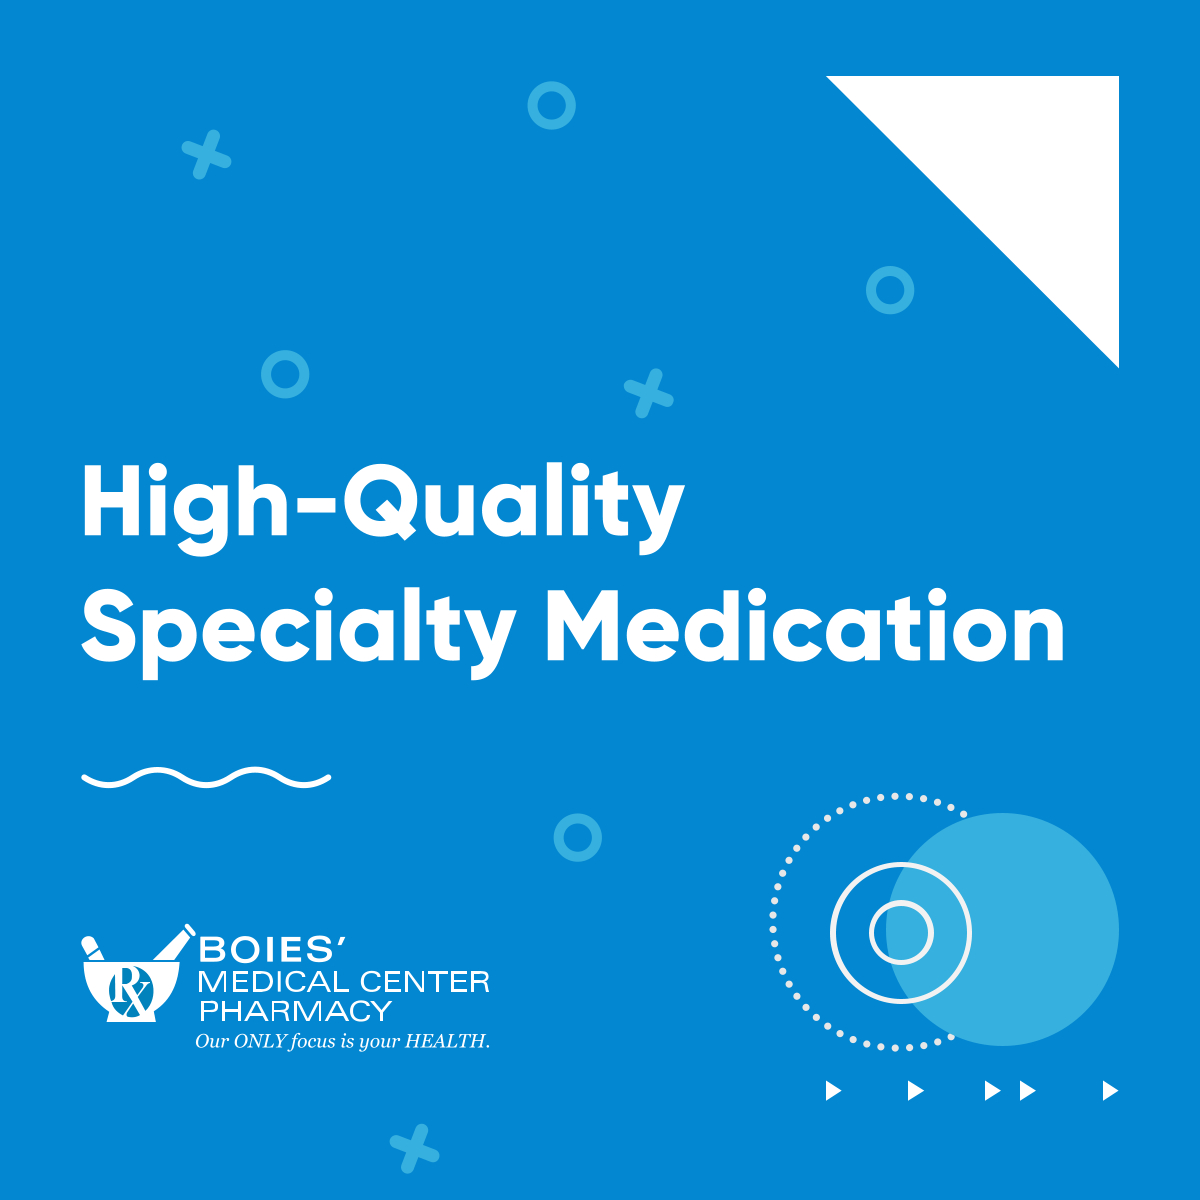 boiesmedicalcrx: We offer specialty medications for health conditions such ...